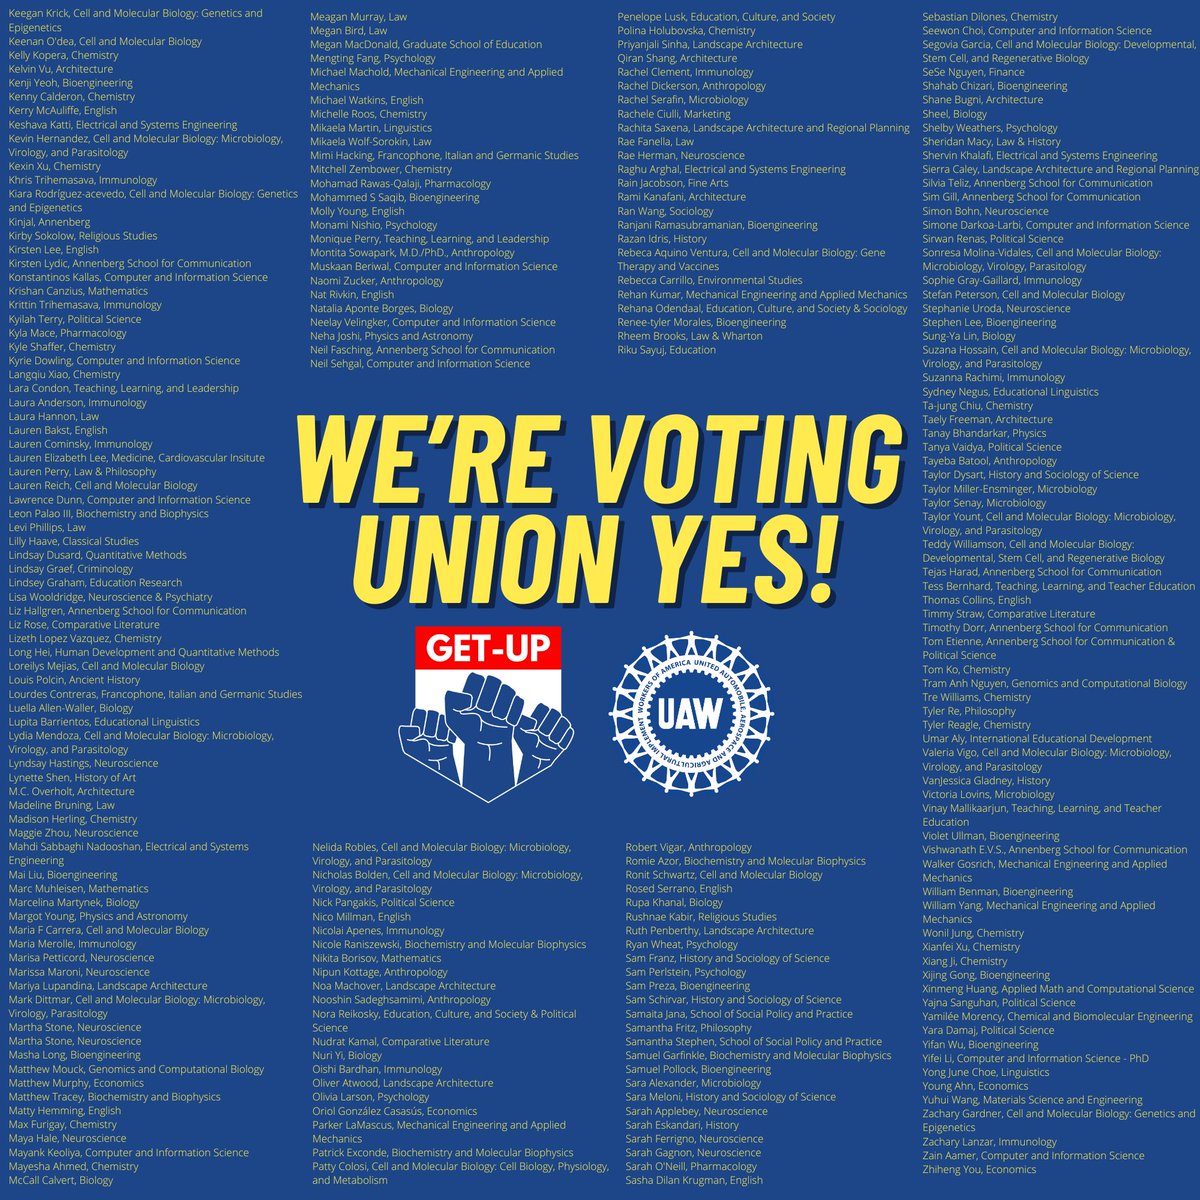 We are graduate student workers from over 100 departments and programs across Penn. On April 16 & 17, we vote YES to form a union in order to negotiate improvements to our working conditions and have a stronger voice for graduate workers at Penn. Join us! tinyurl.com/GETUPvoteYES